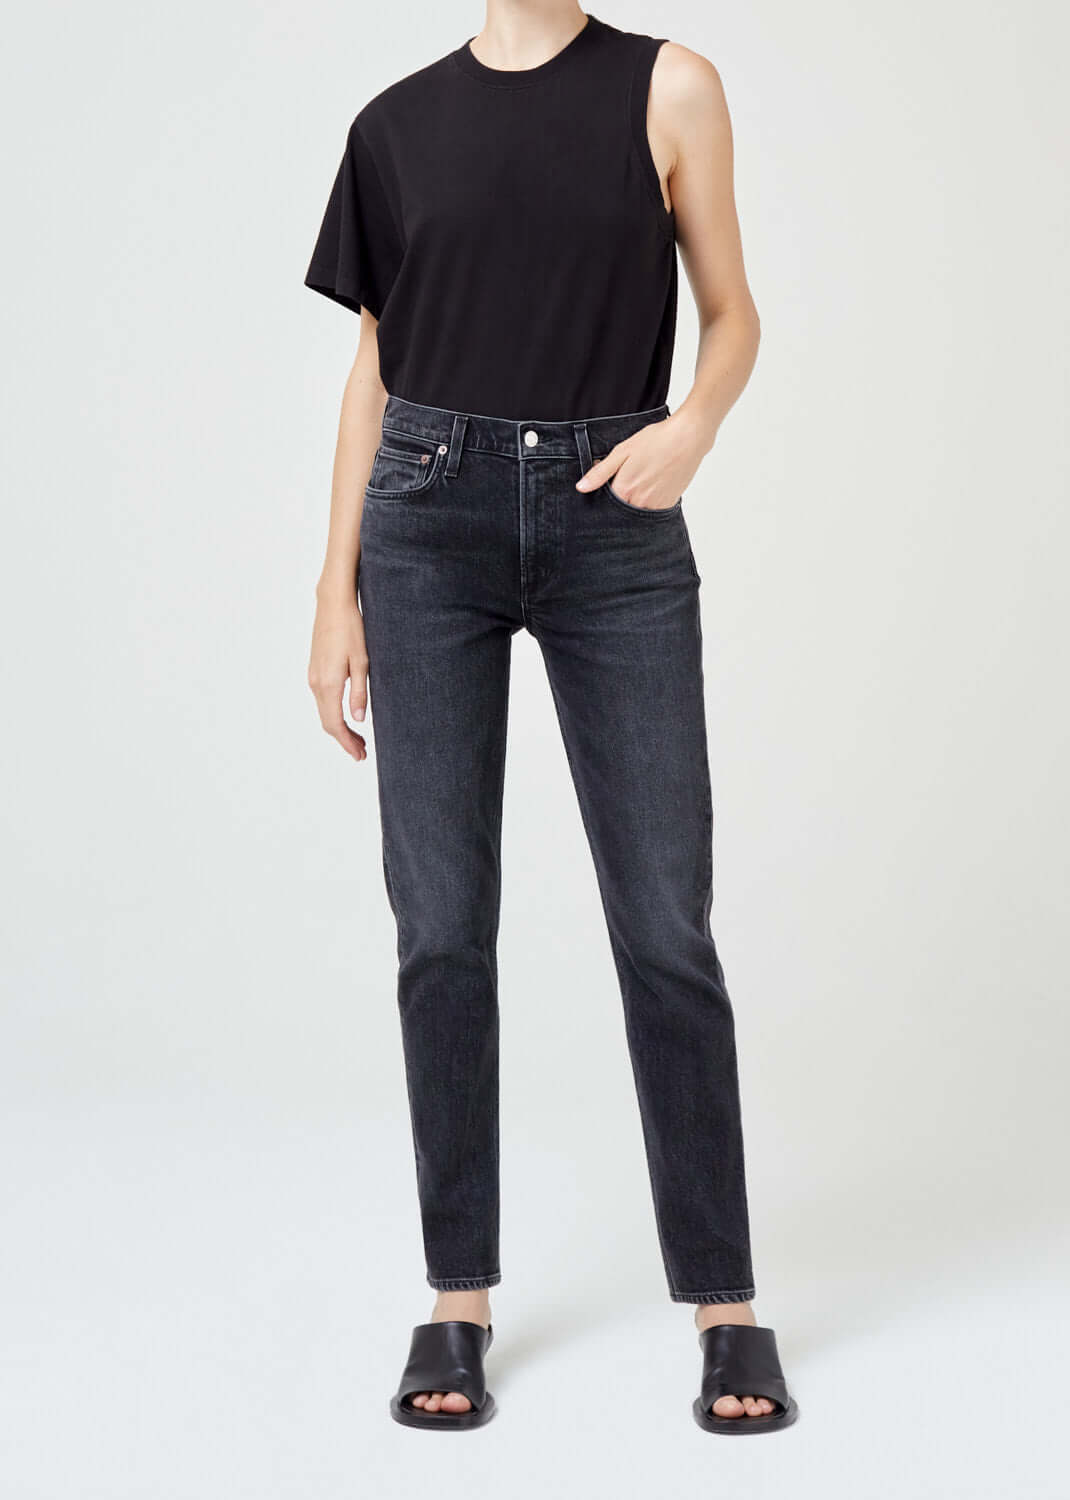 Agolde Lyle Stretch Straight Jeans in Technique from The New Trend